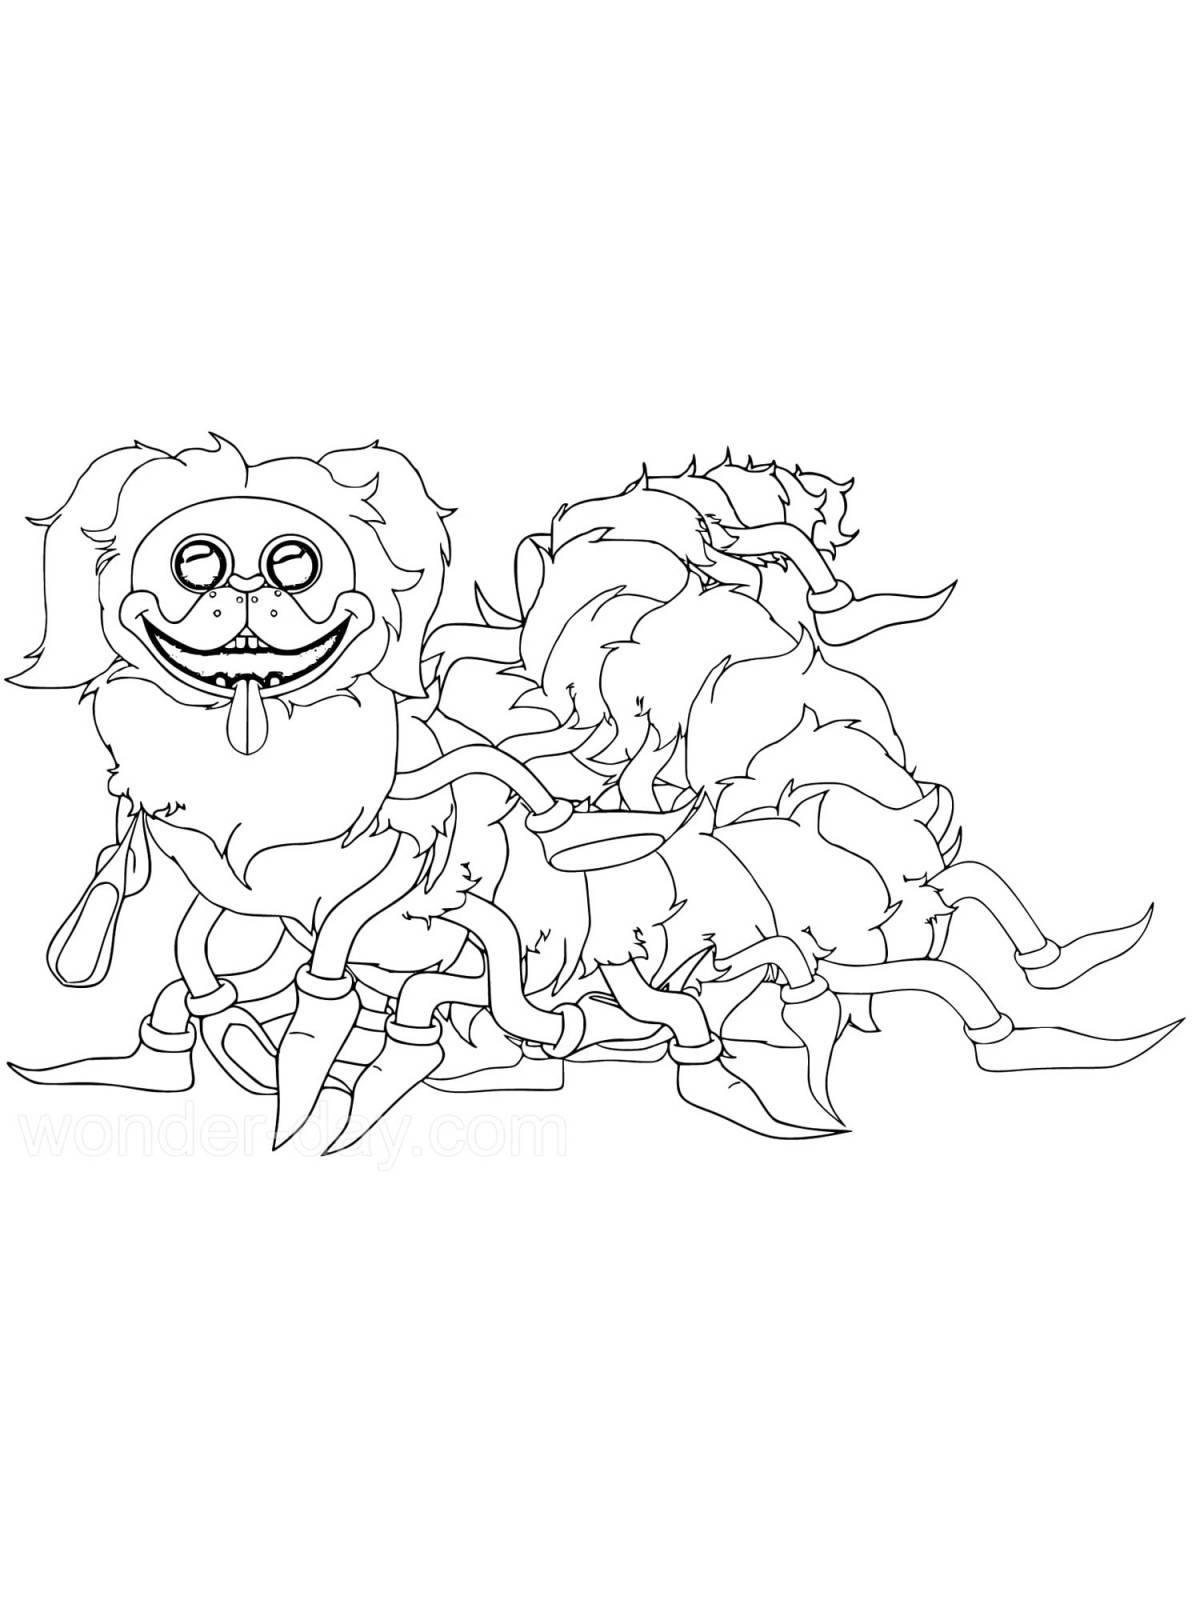 Coloring page the incredible pug caterpillar